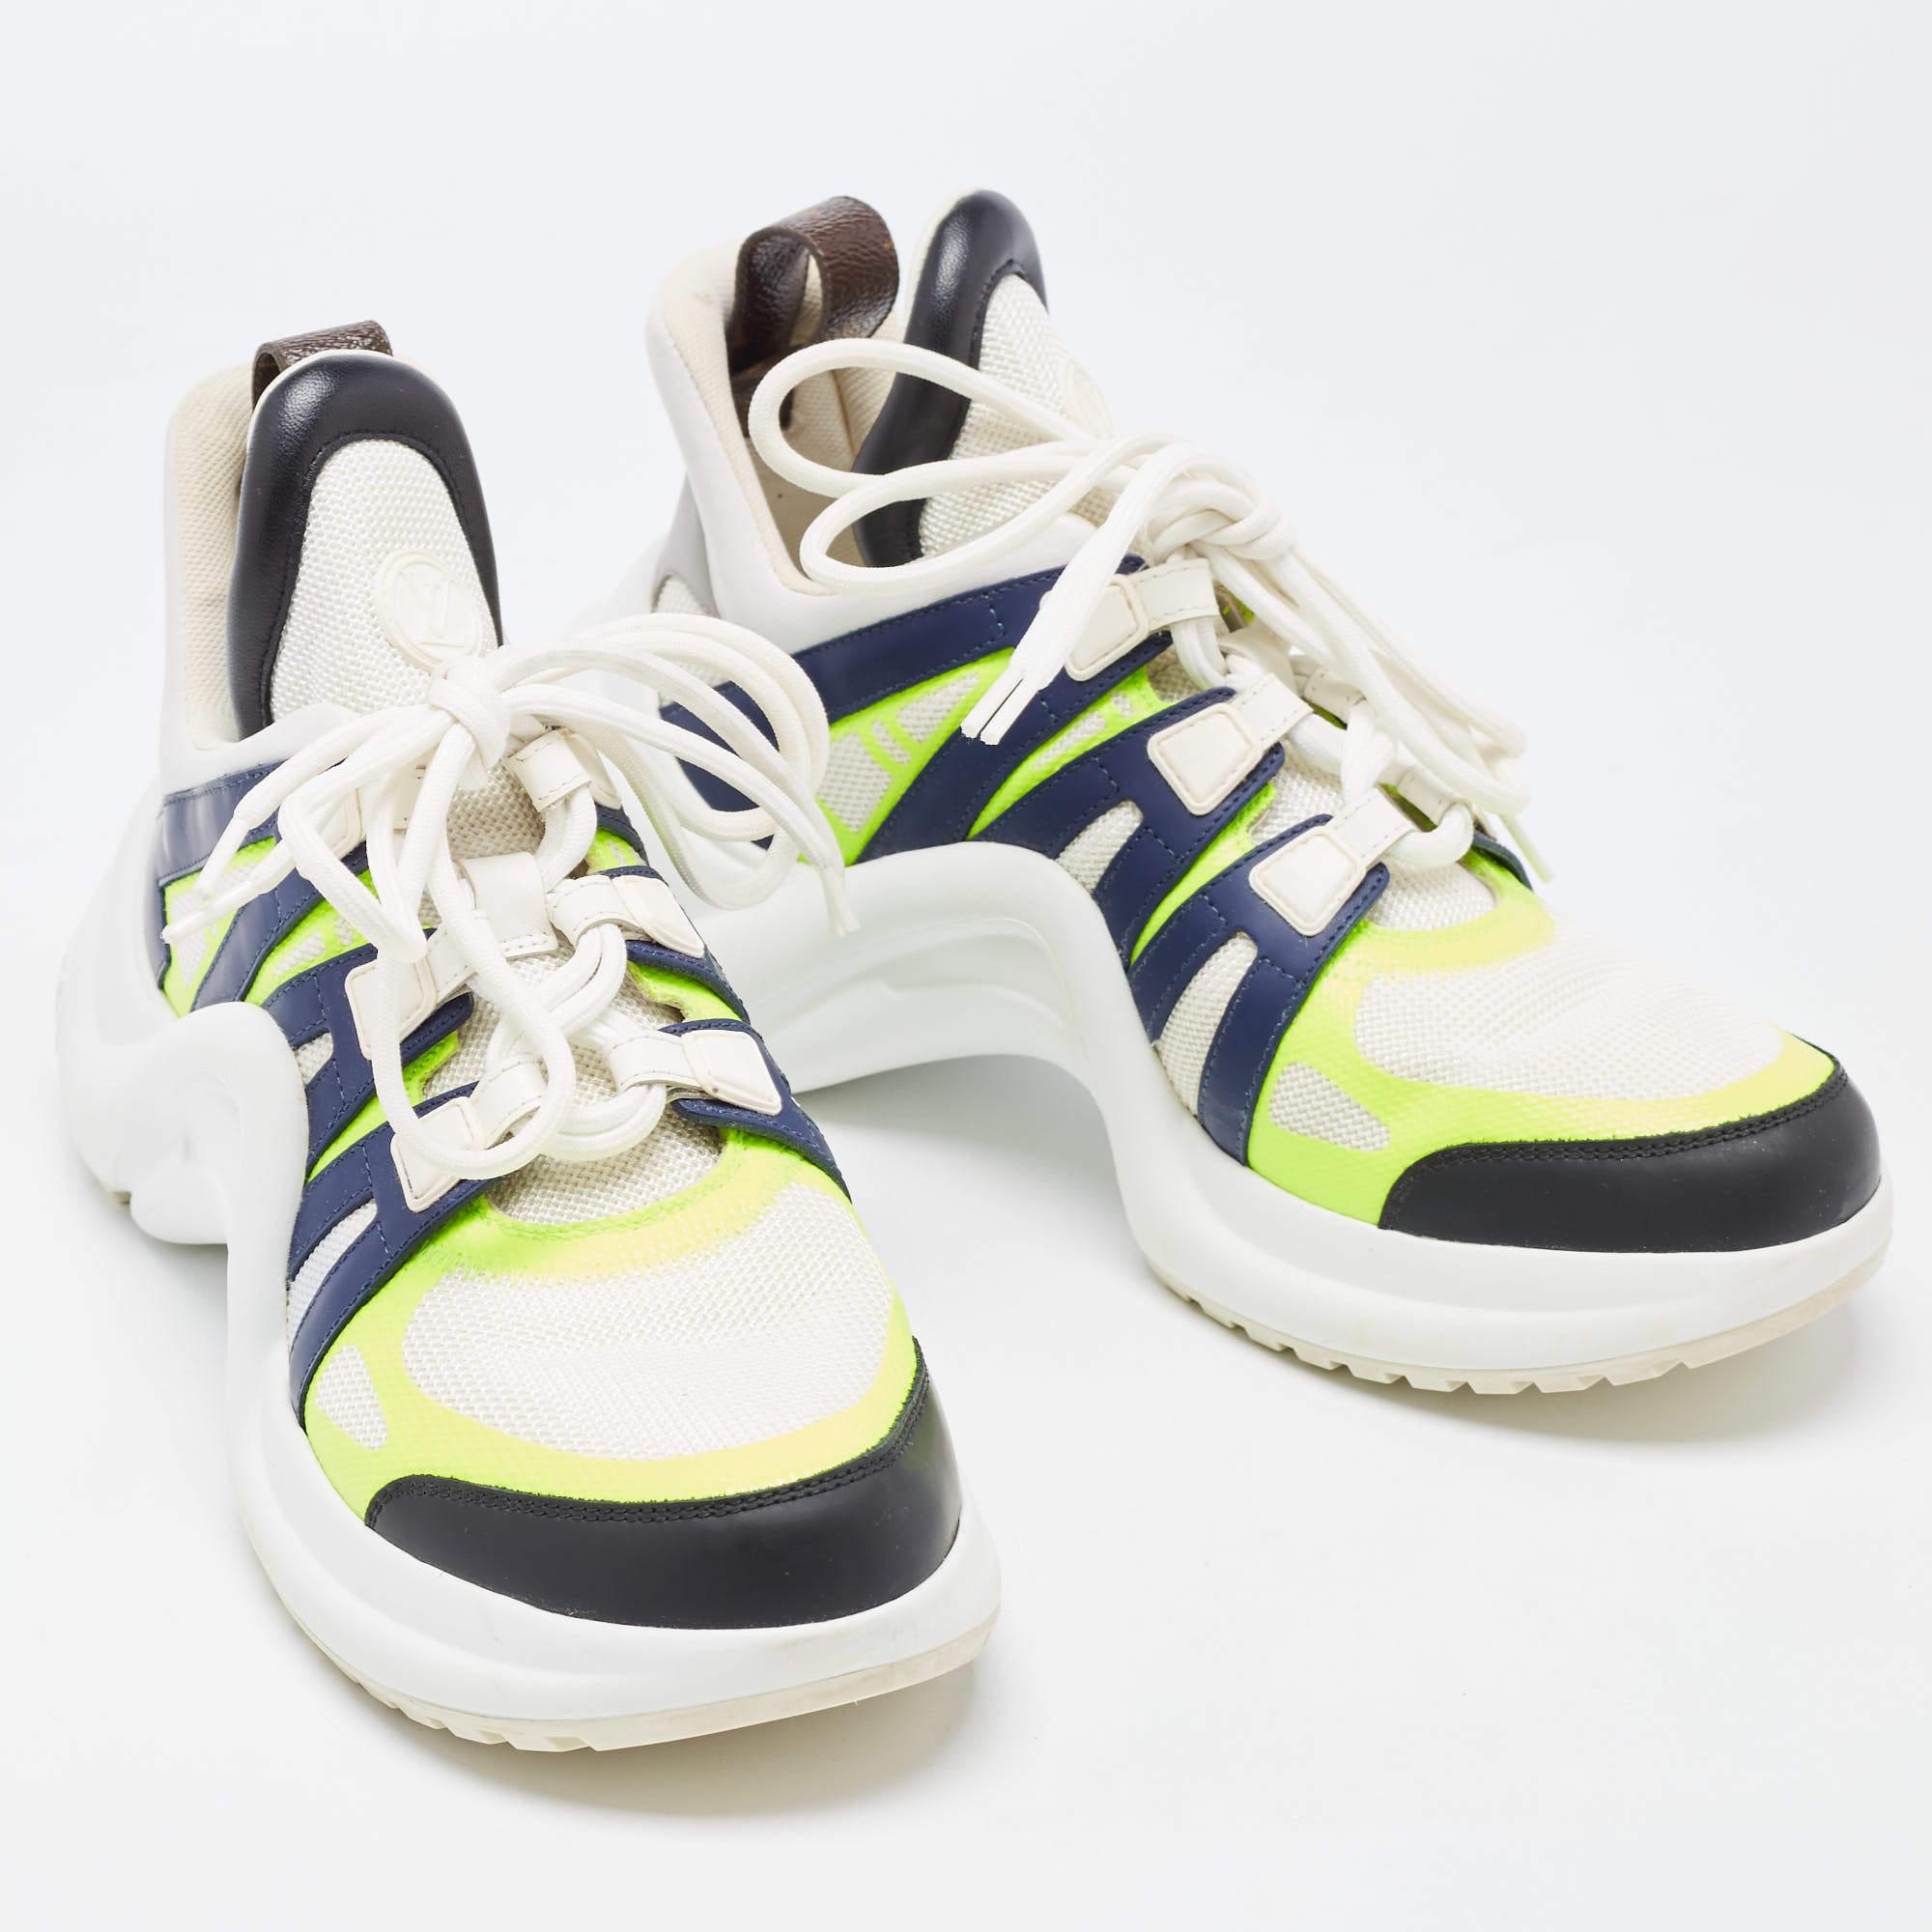 Louis Vuitton Multicolor Leather and Mesh Archlight Sneakers Size 39.5 For Sale 3